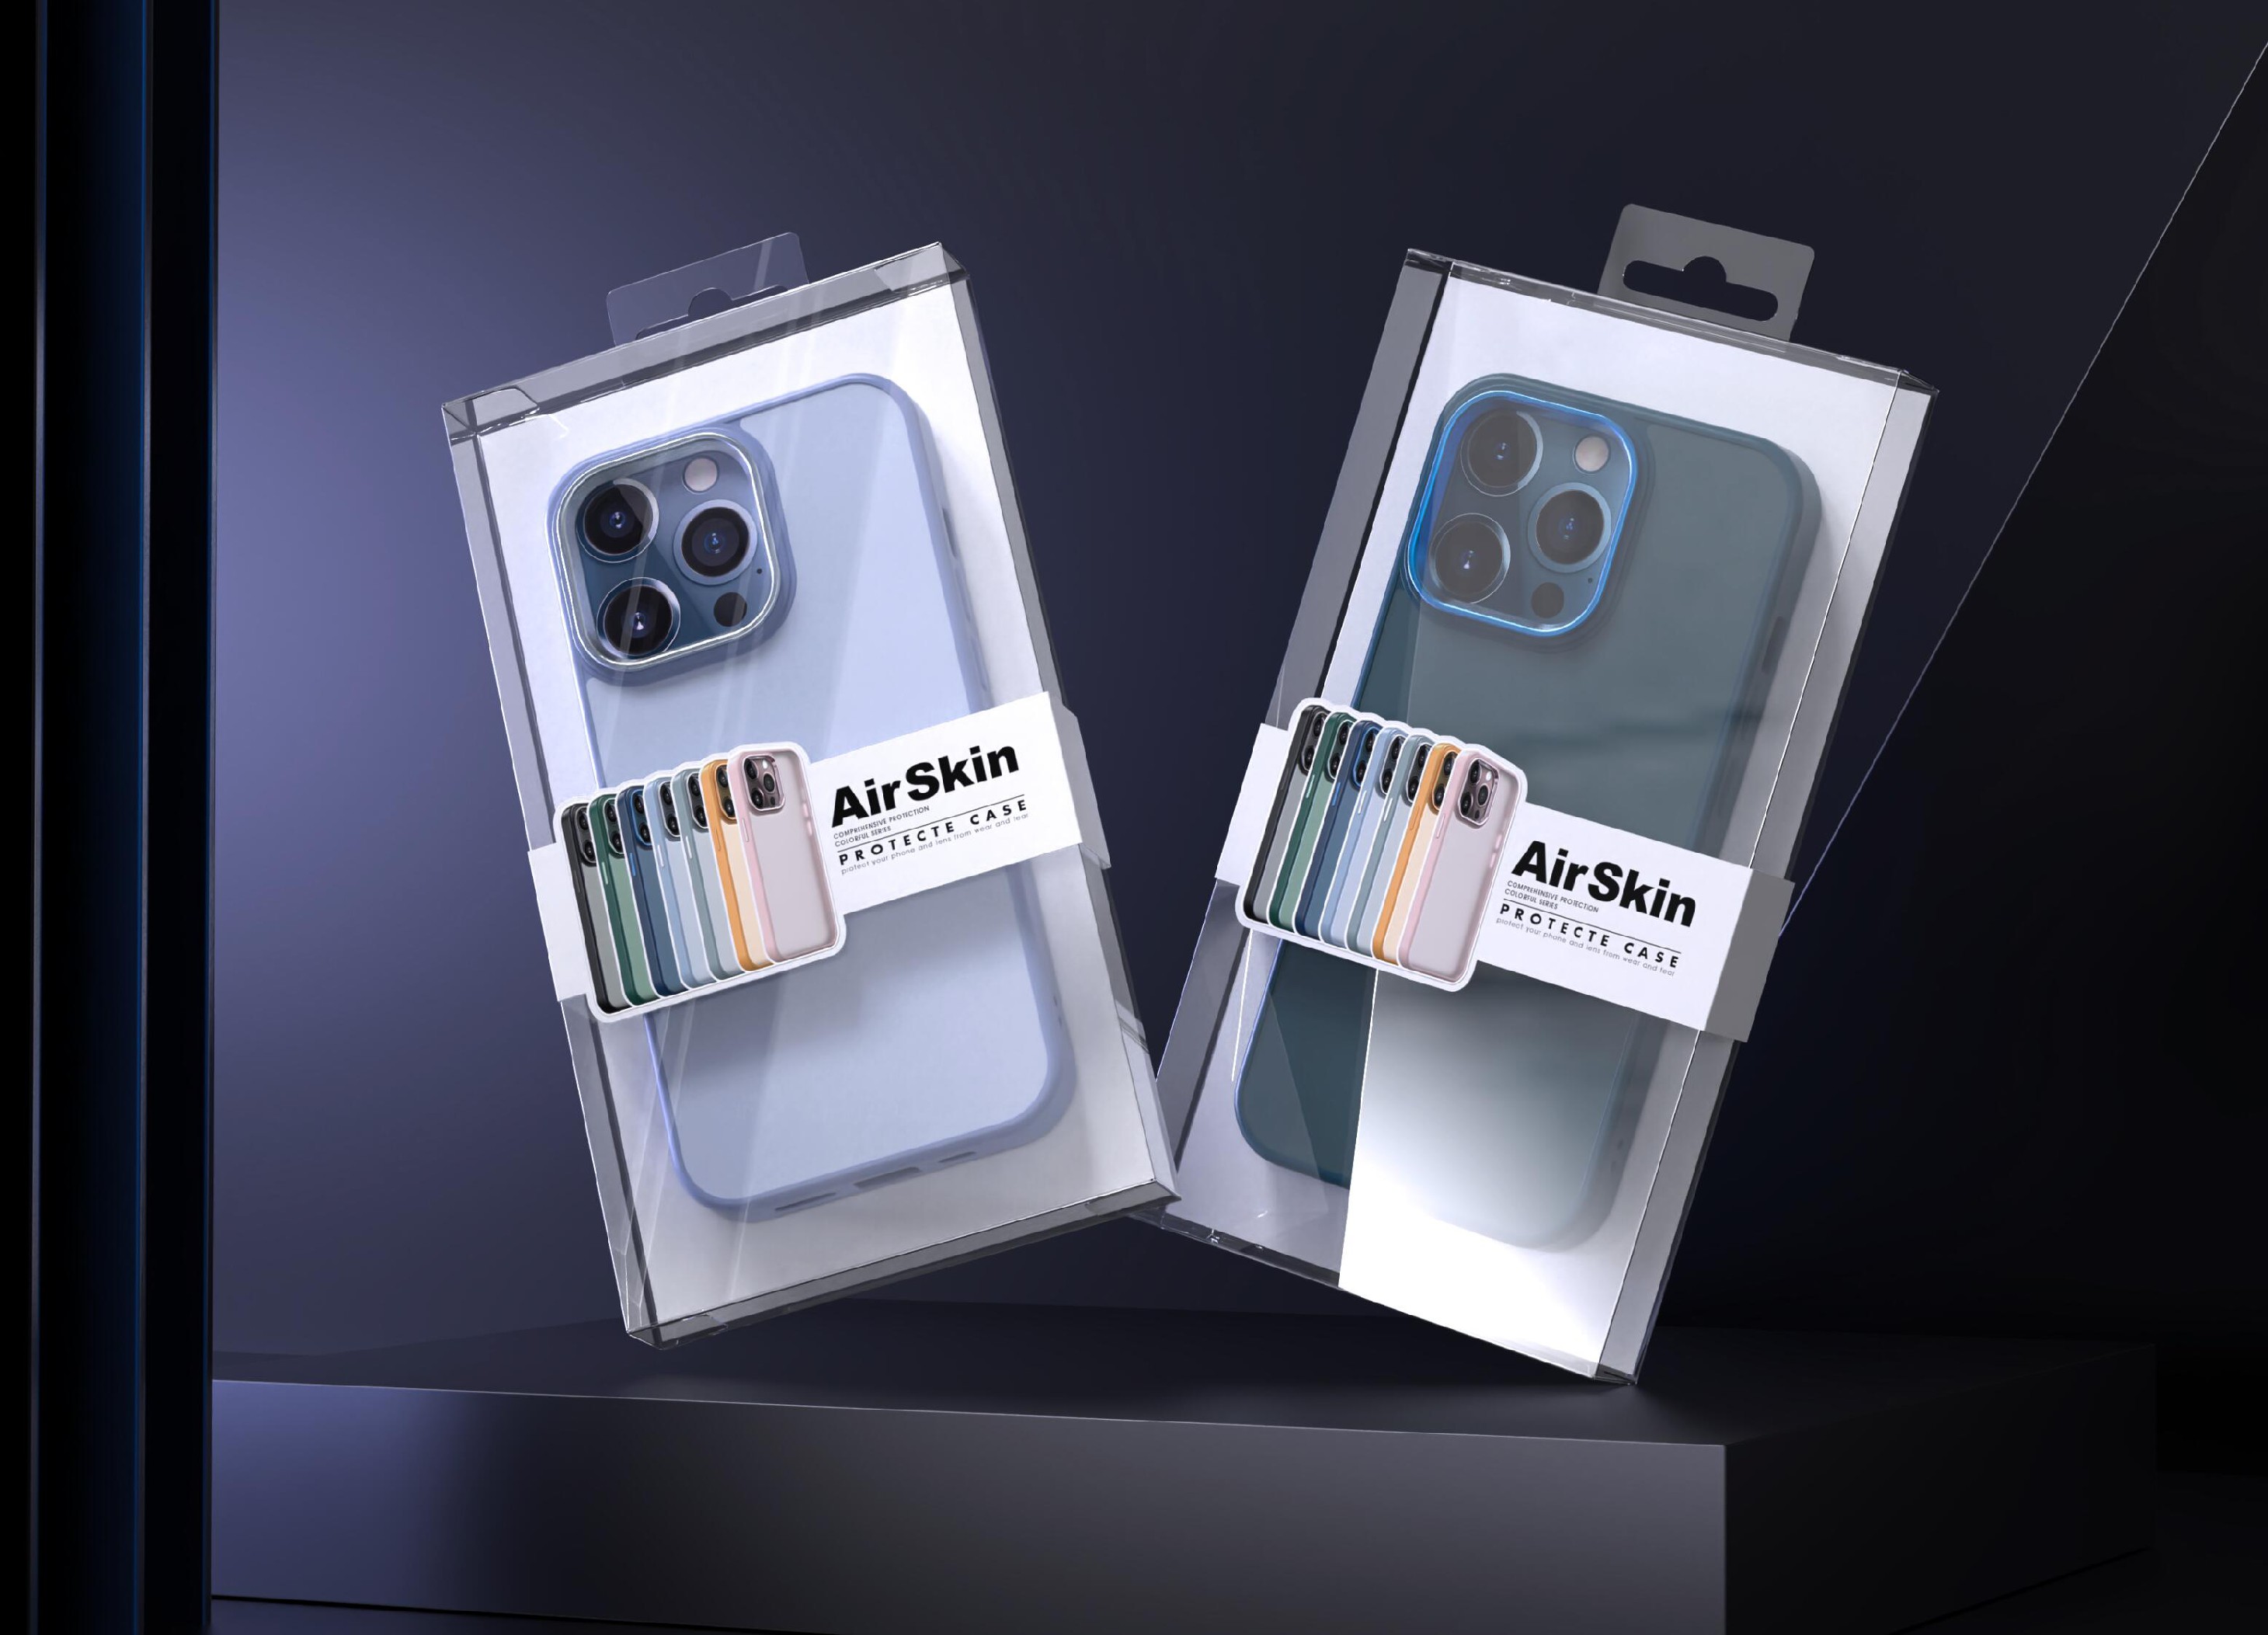 Innovative Design and Color Selection for Mobile Phone Case Packaging